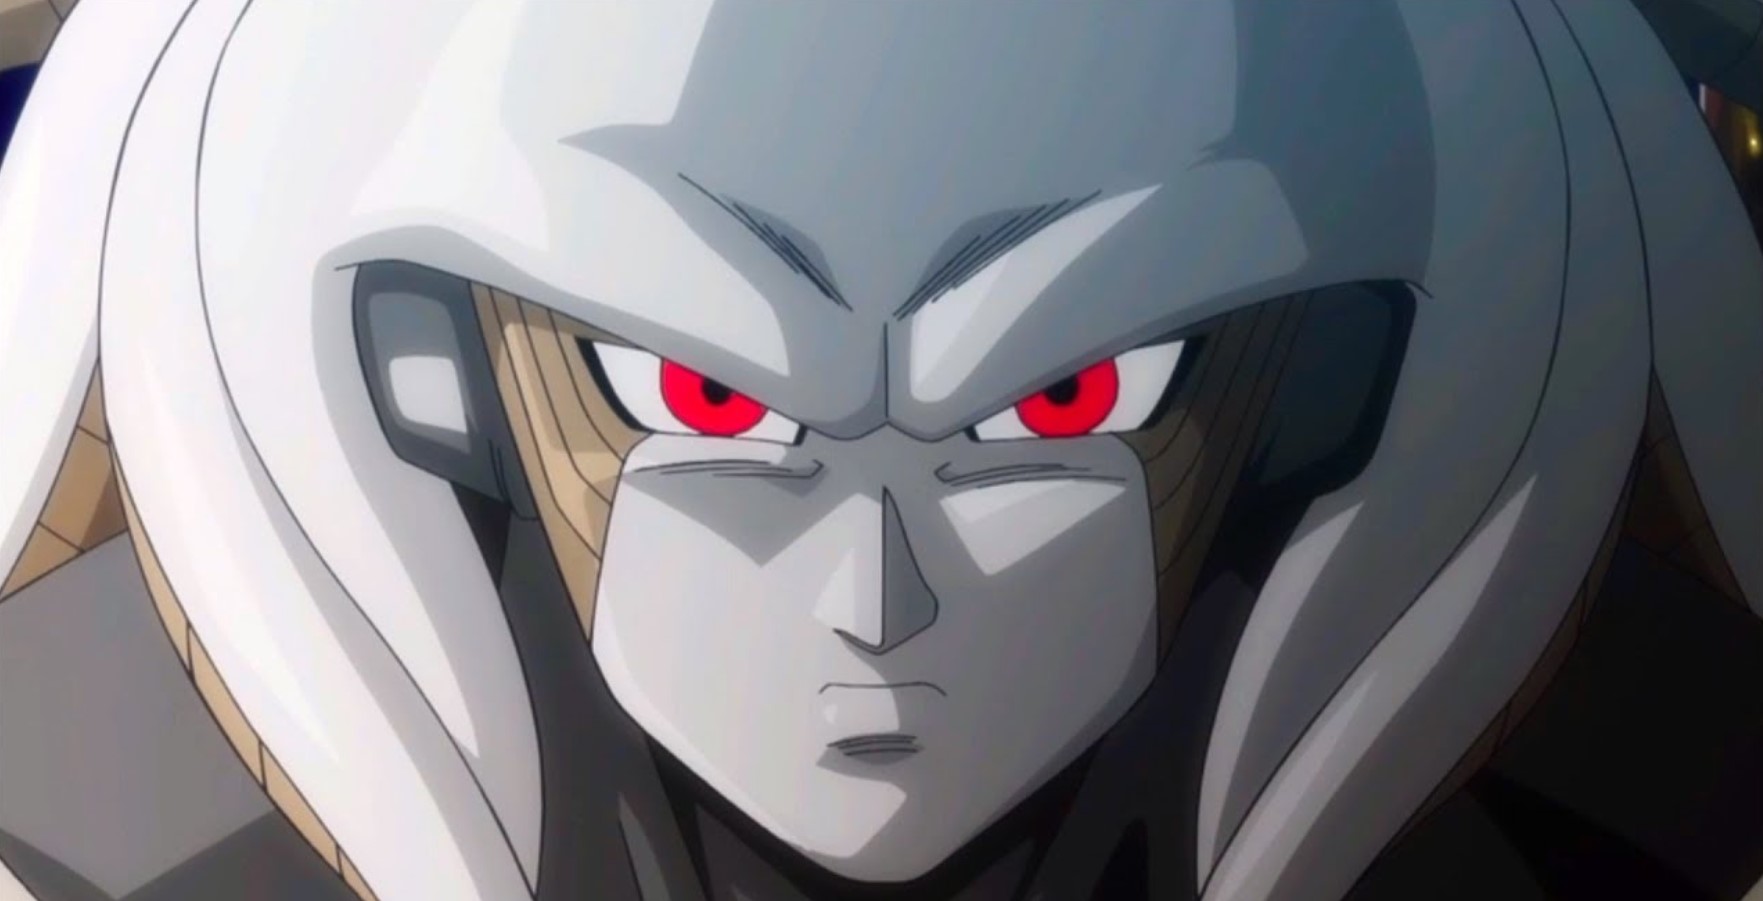 Super Dragon Ball Heroes Episode 45: In The Divine Realm! Release Date &  Plot Details